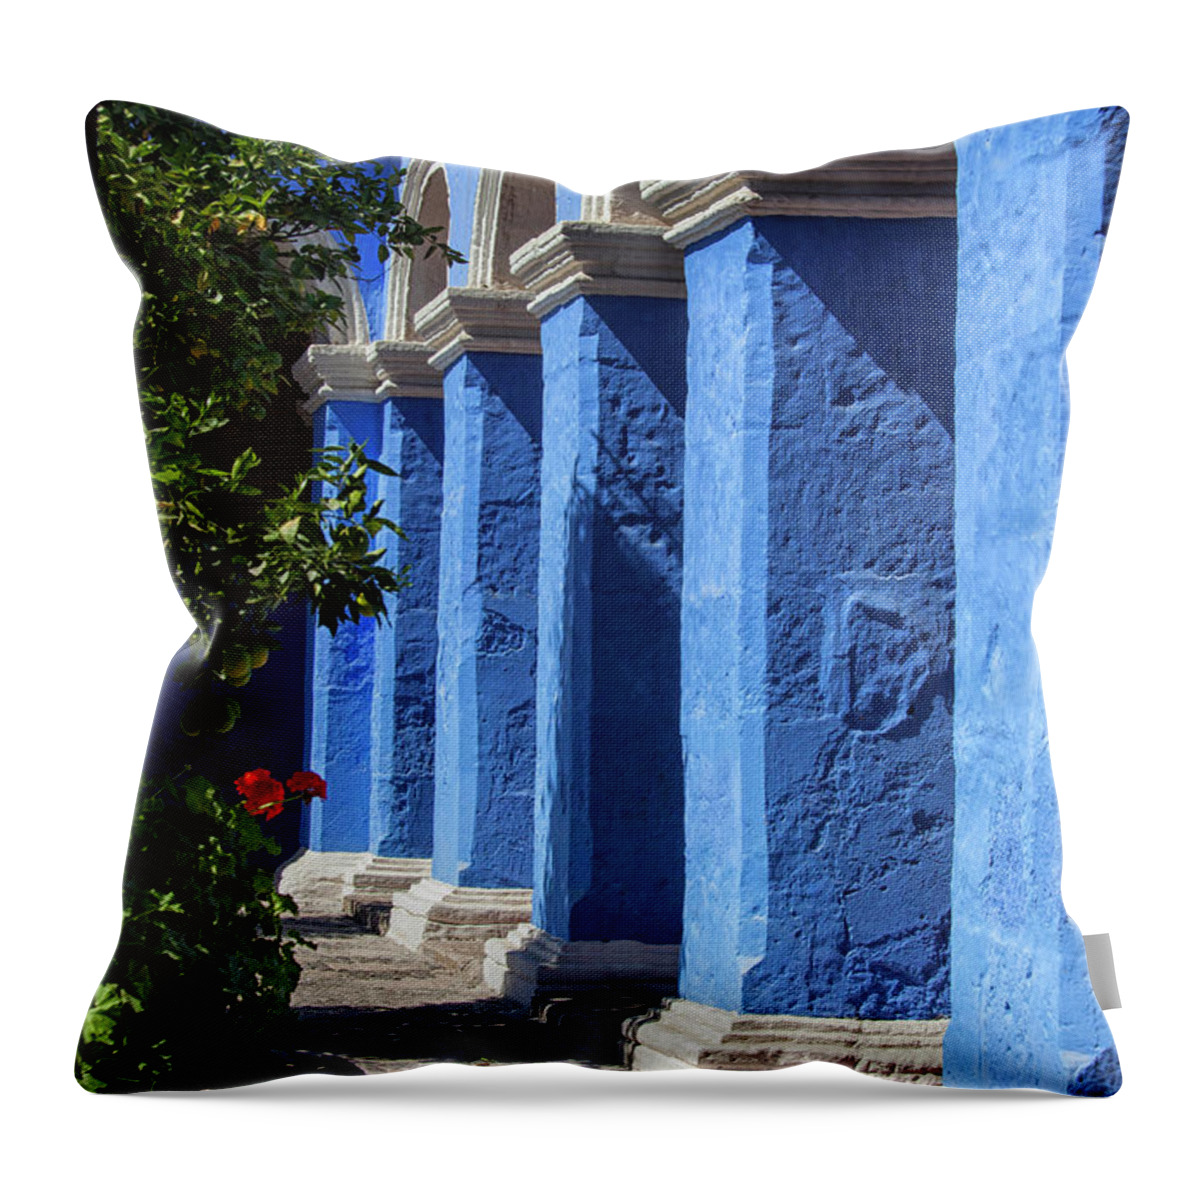 Still Life Throw Pillow featuring the photograph Blue monastery by Patricia Hofmeester